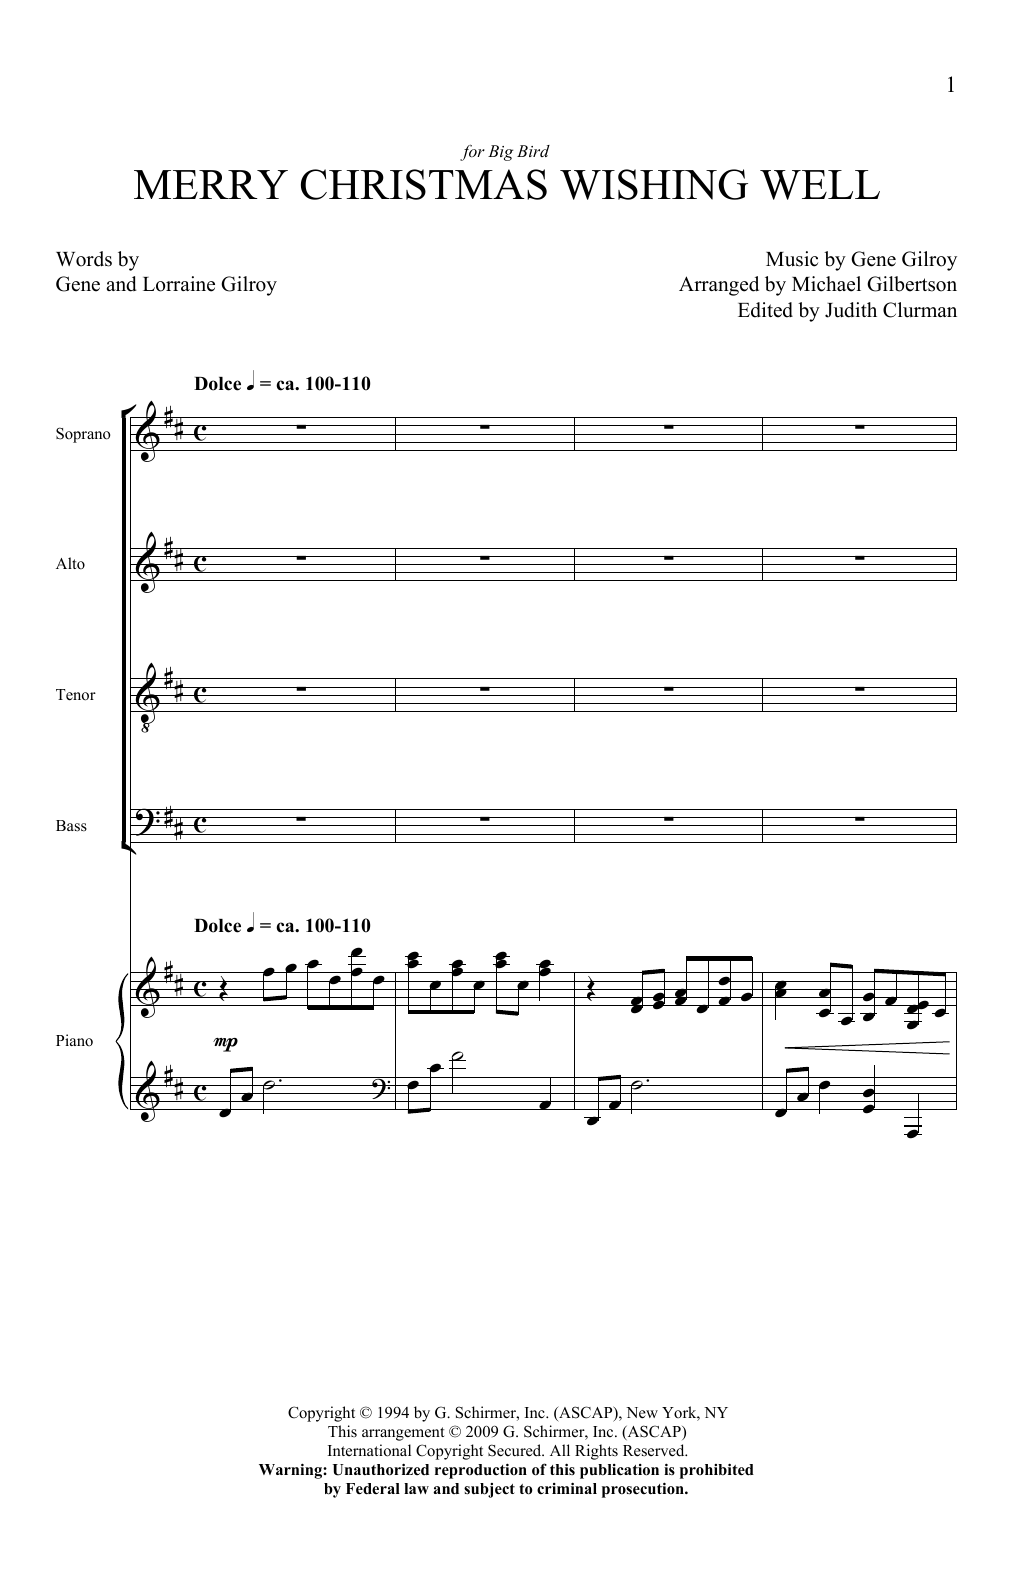 Download Gene Gilroy Merry Christmas Wishing Well (arr. Mich Sheet Music